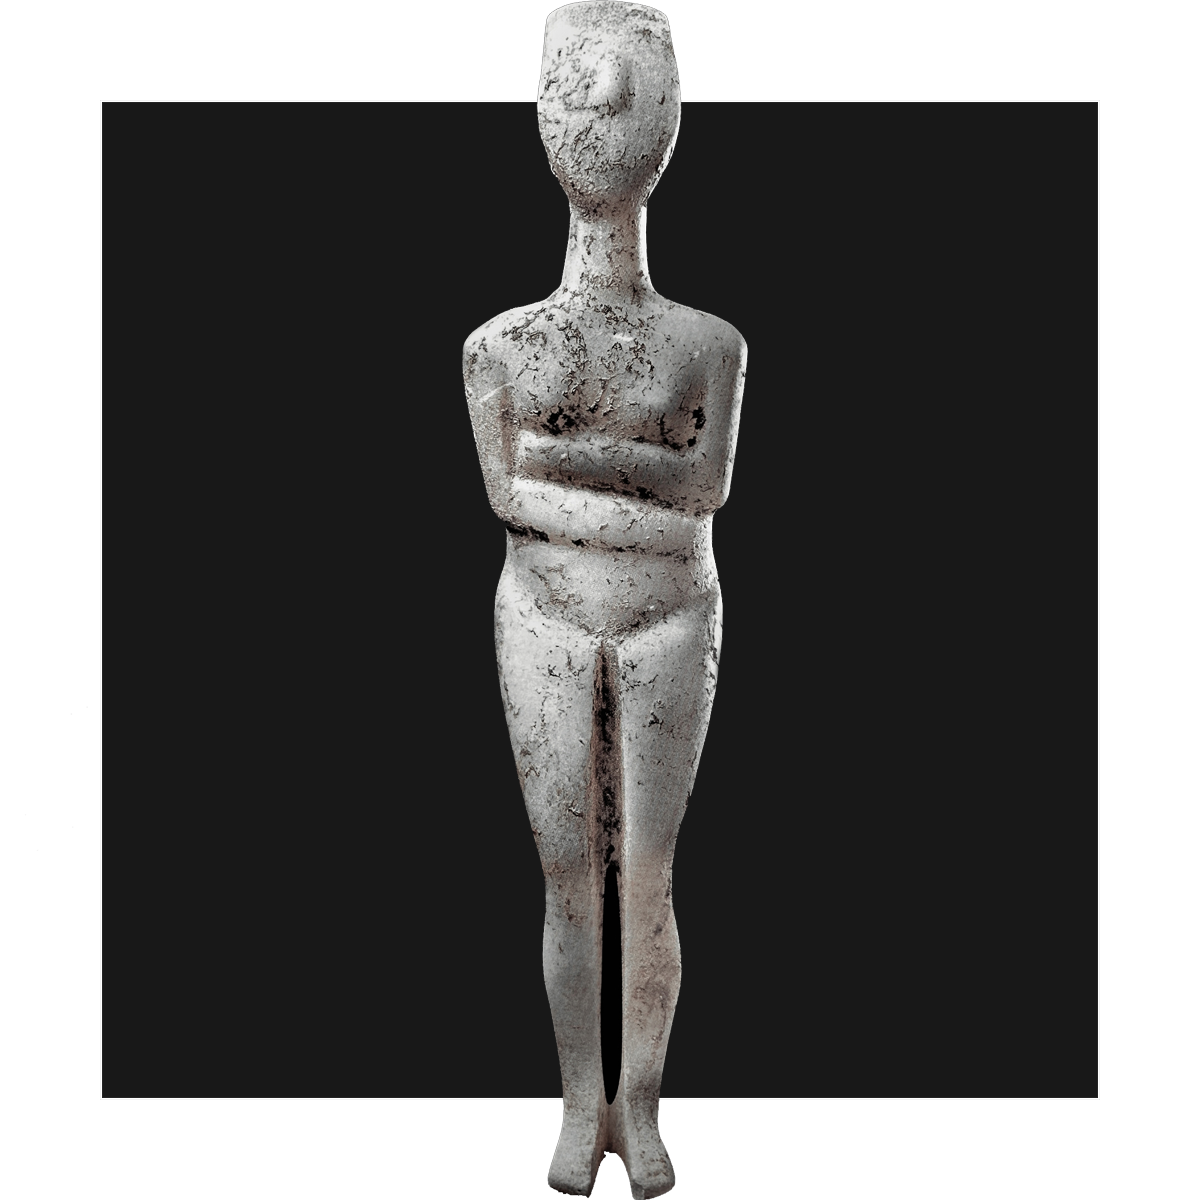 Canonical Figure Cycladic Sculptures